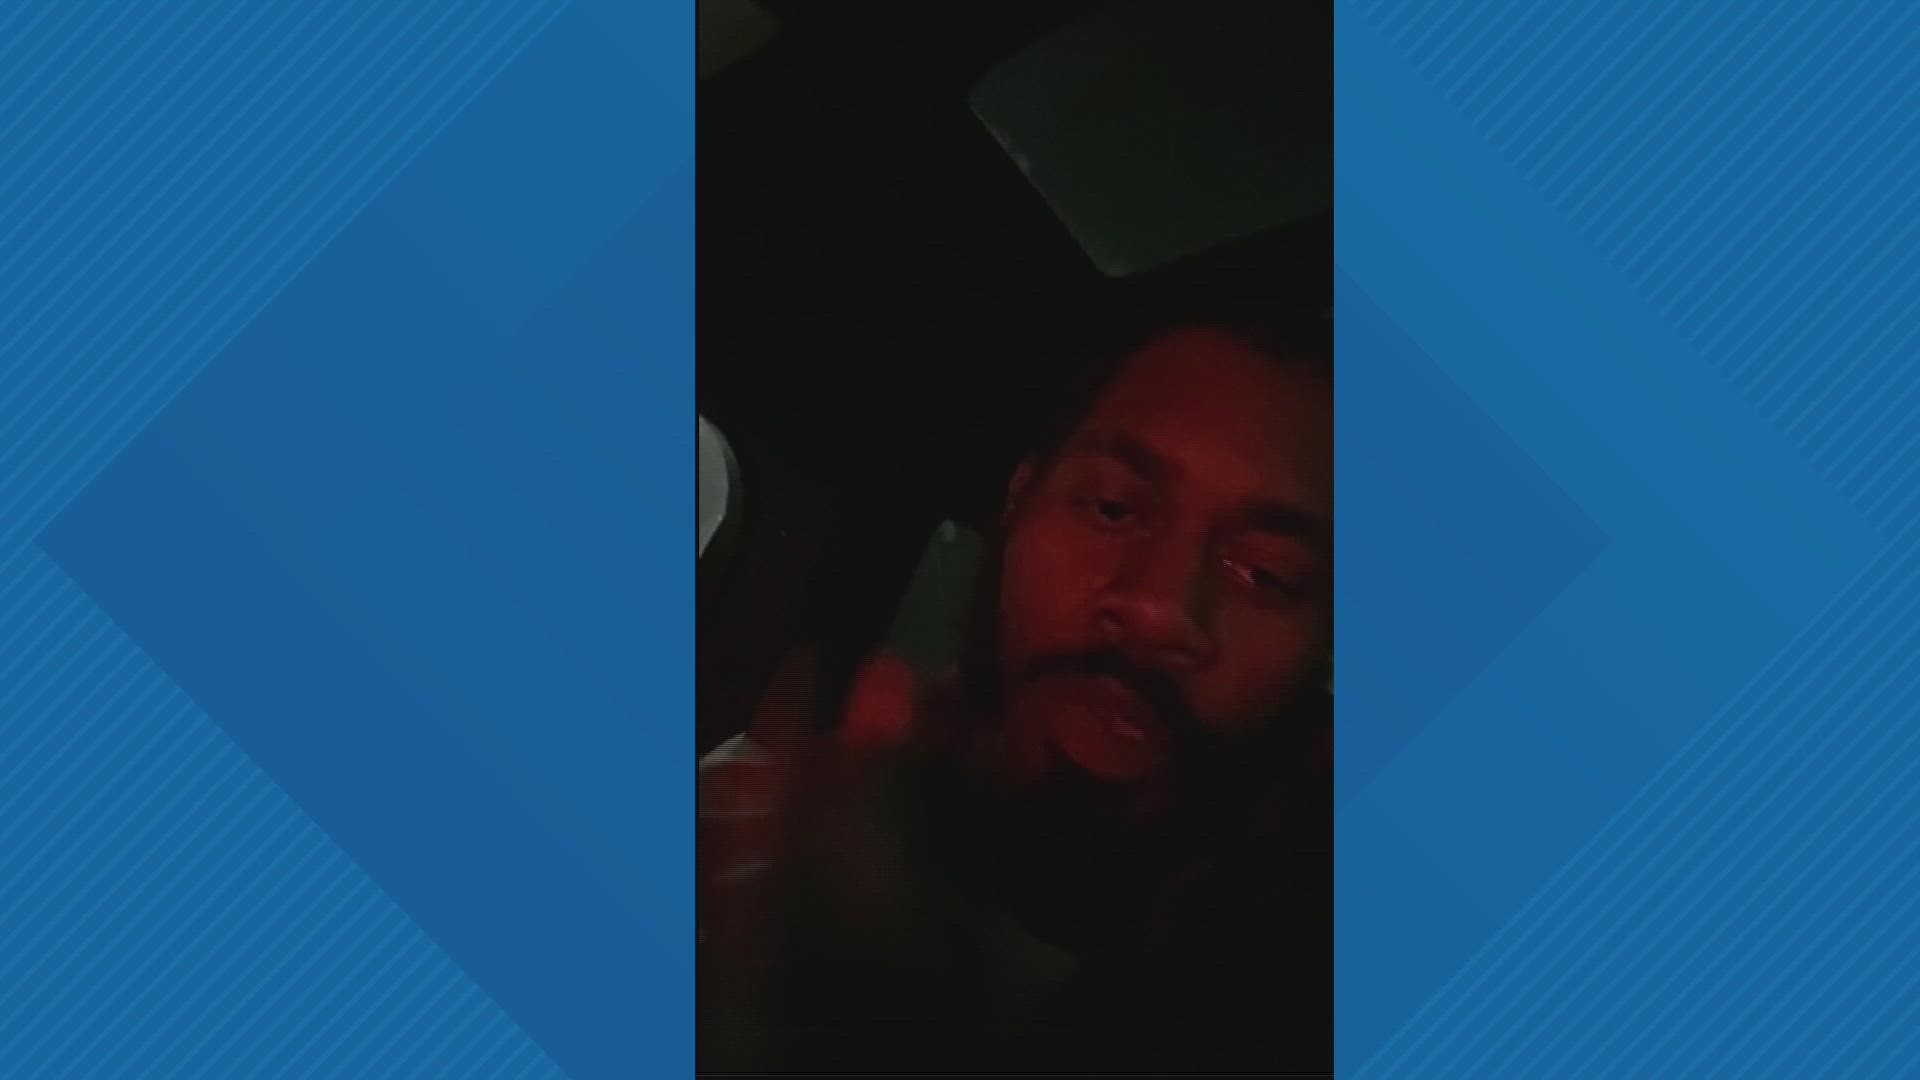 This is video from St. Louis Alderman Brandon Bosley's Facebook live Thursday night. He said a woman tried to rob him, saying she had a weapon.